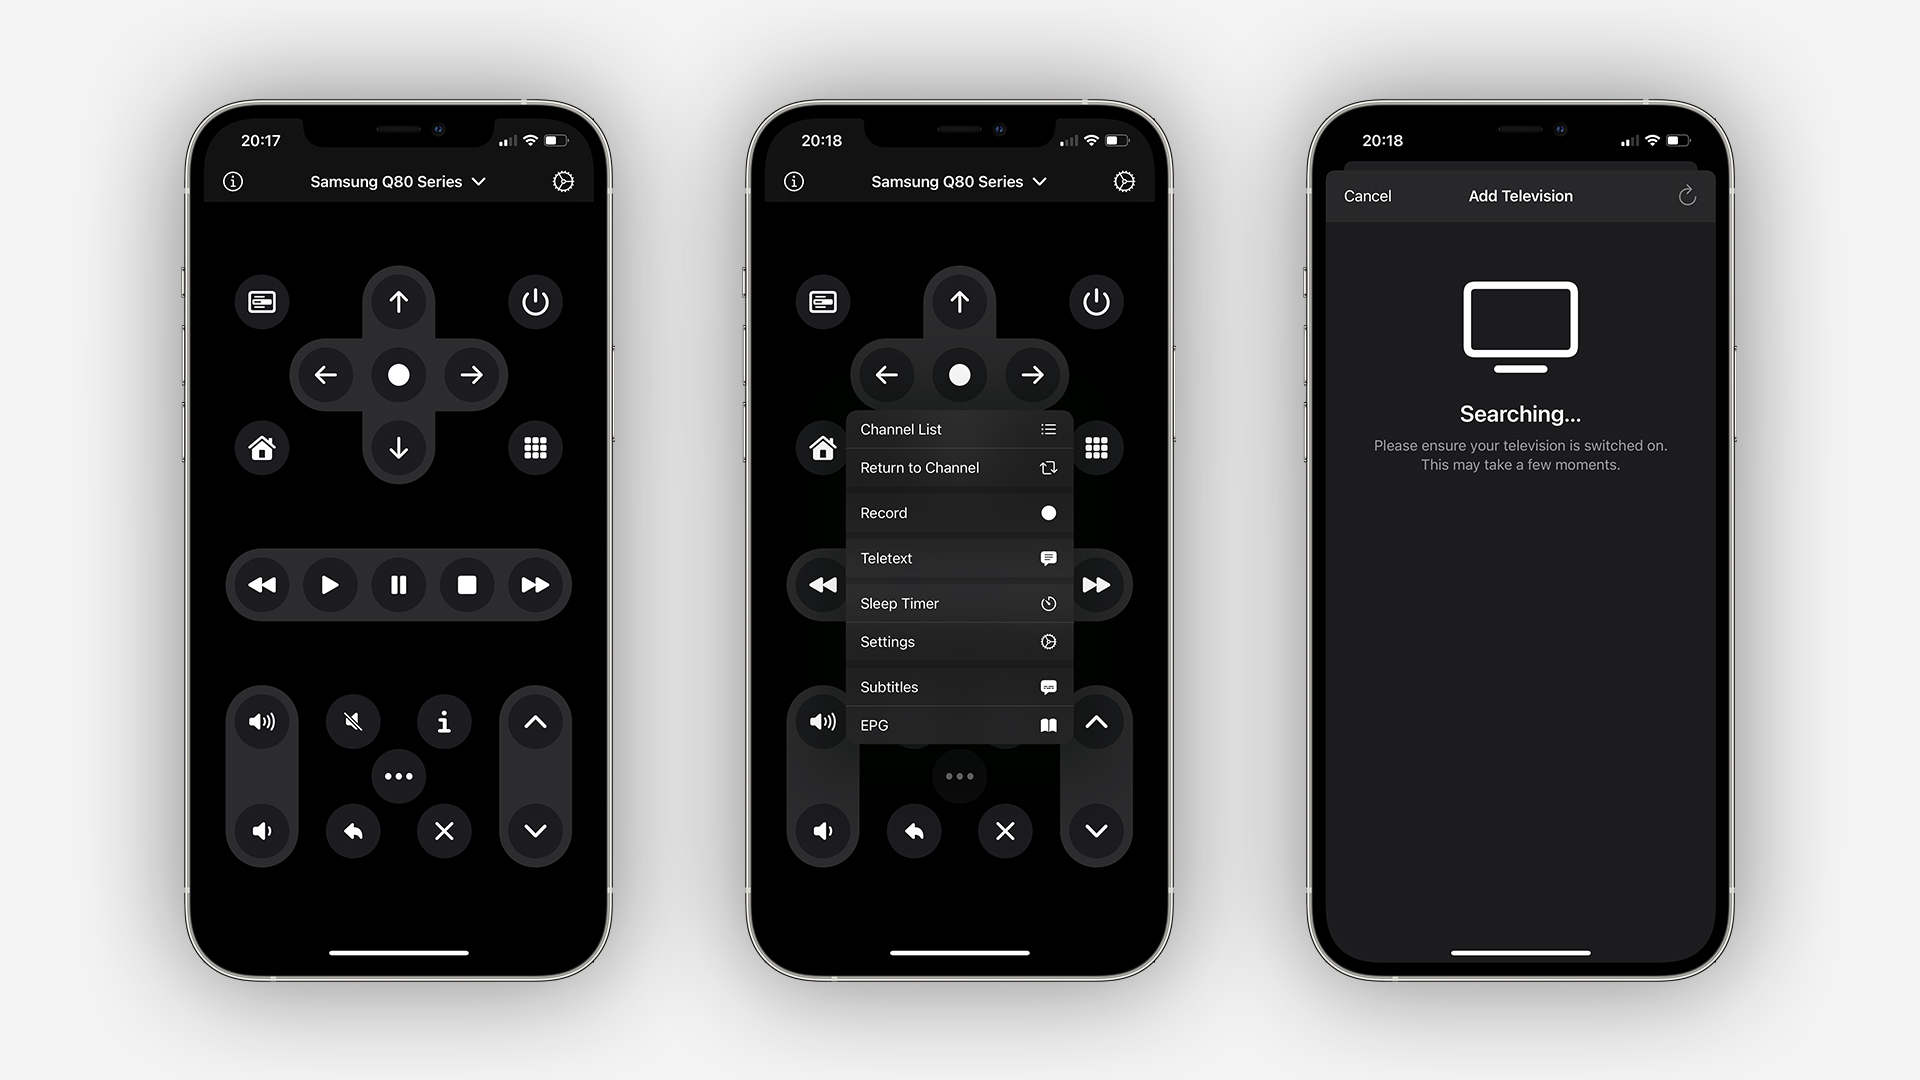 Free LG TV Remote App For Android